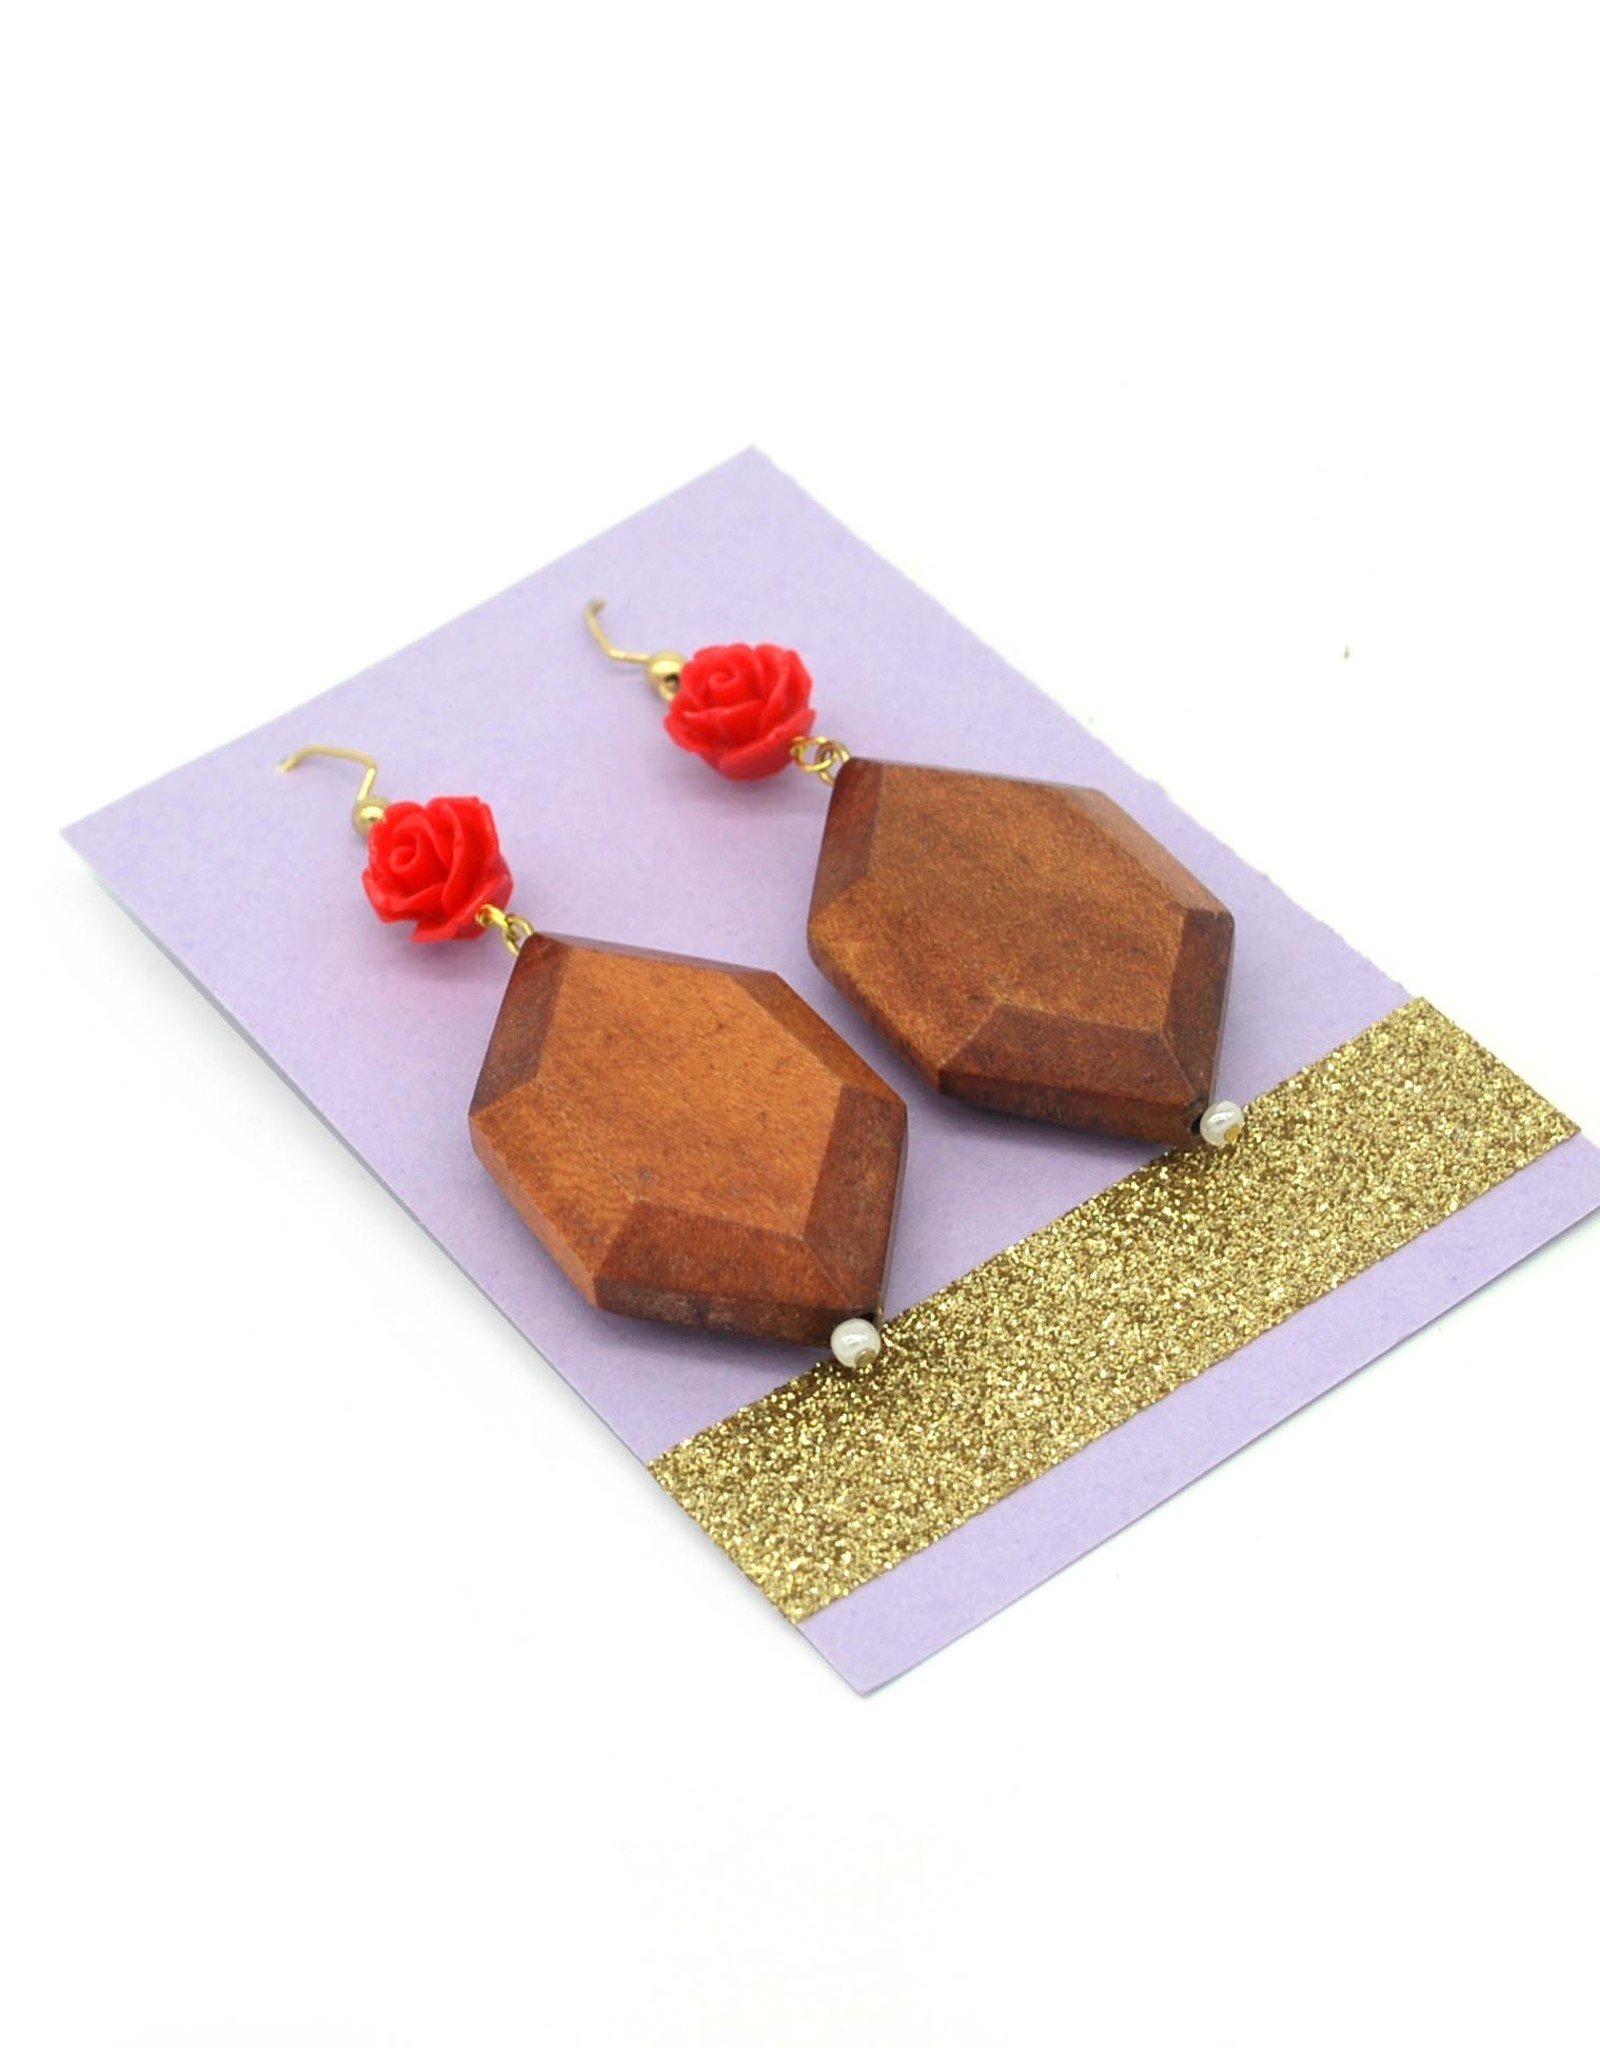 Wood and Rose Earrings by Dana Diederich